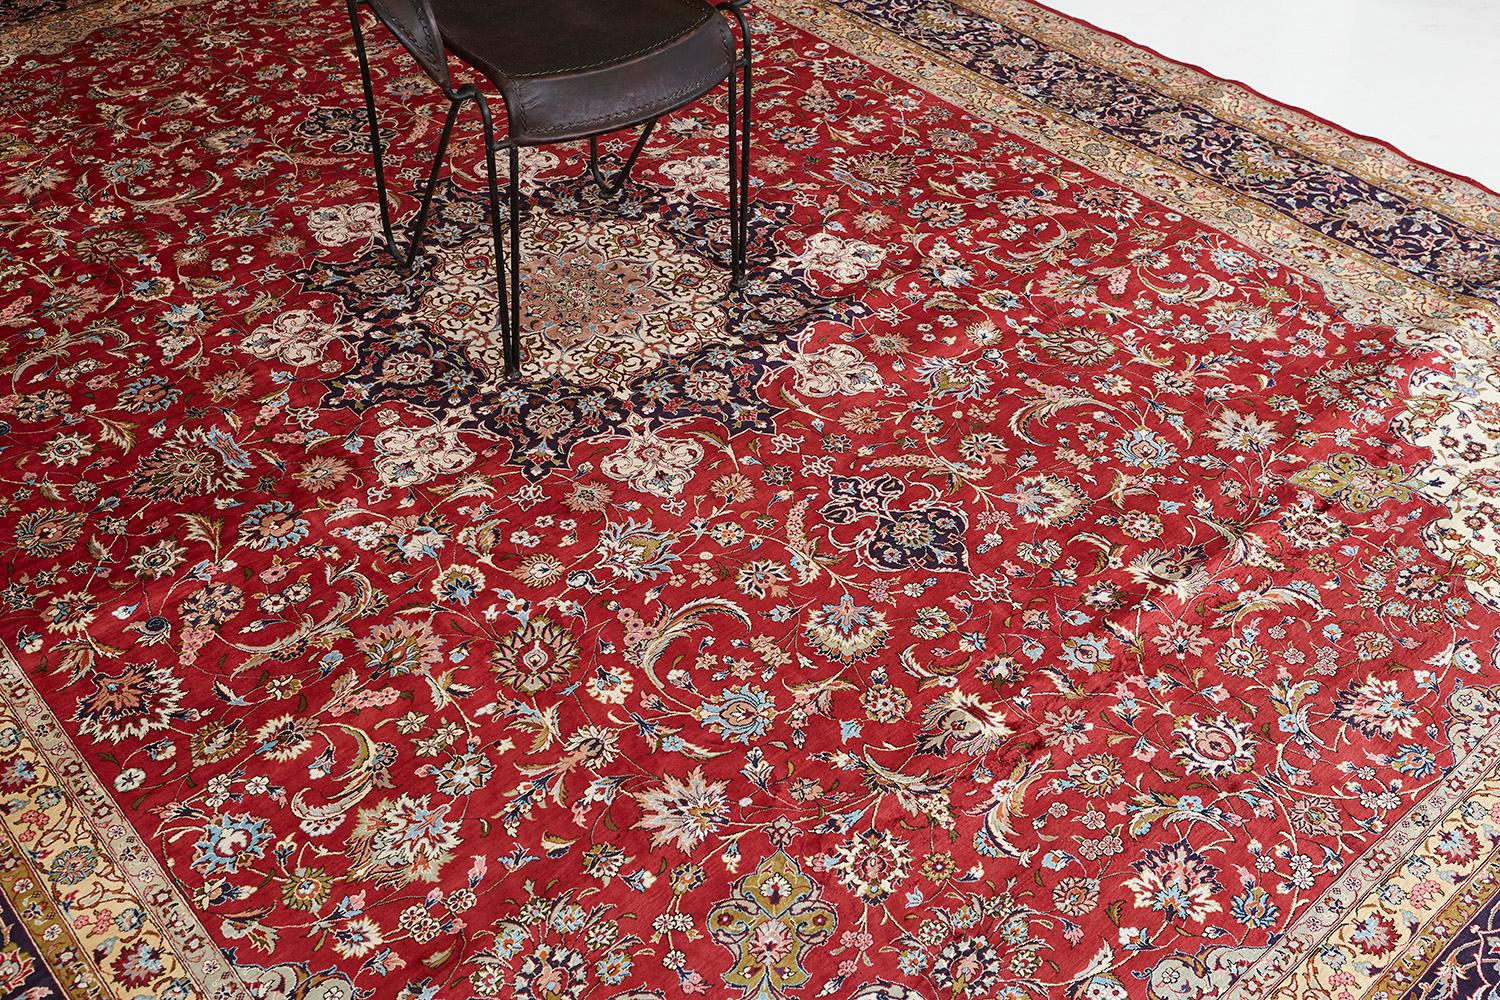 A laudable Fine Persian Tabriz rug features all the blooming elements that intensify into a prominent red field. The main border contains an all-over lattice of issuing split leaves, mini palmettes, and a delicate flowering vinery that makes the rug